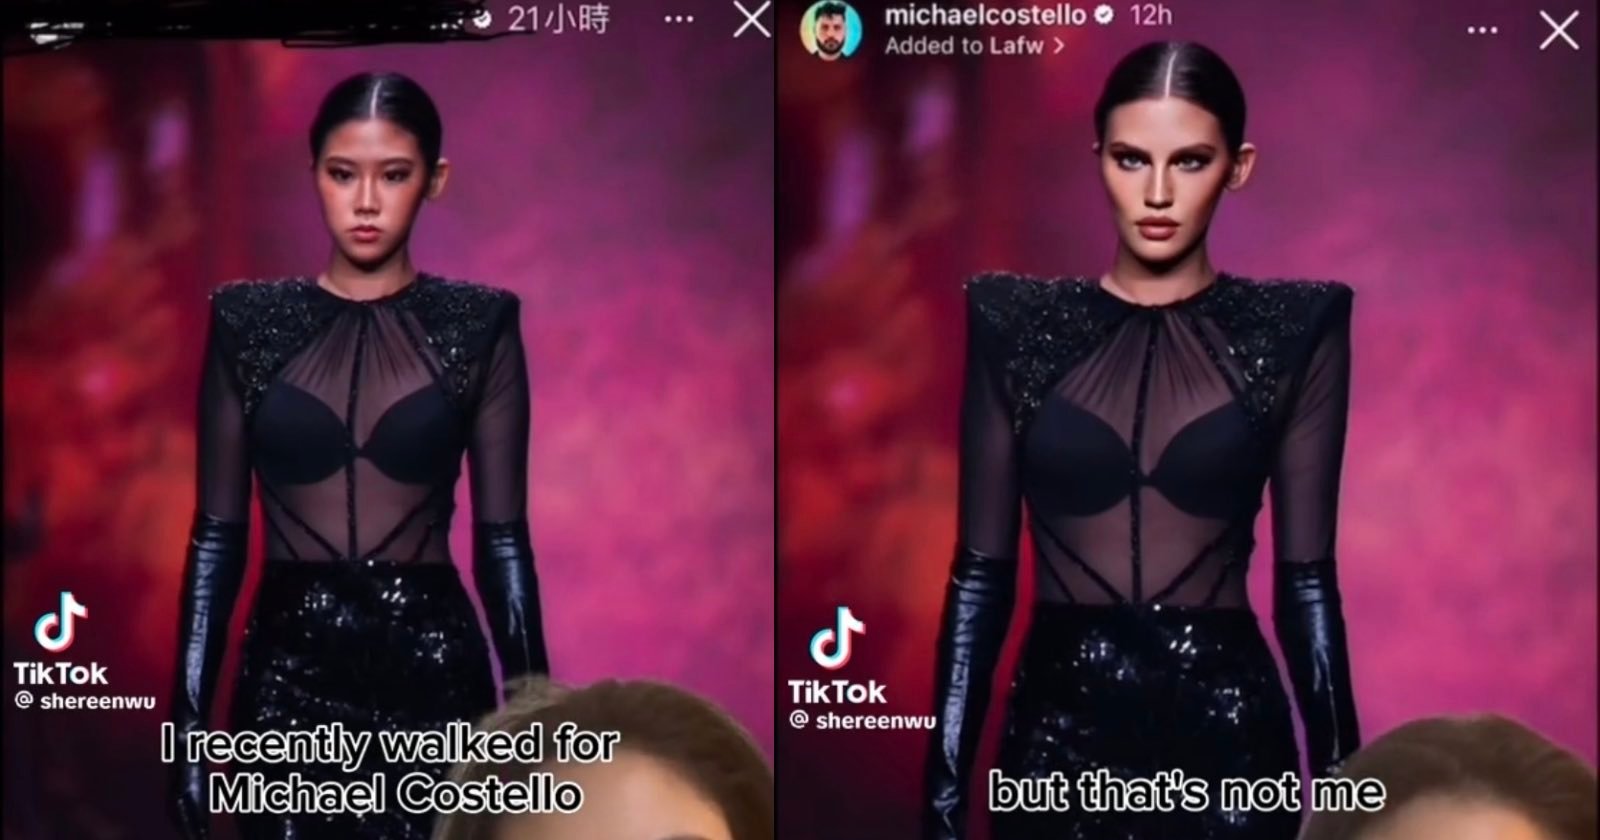 Model Says AI Was Used to Make Her Face Look White in Runway Photo